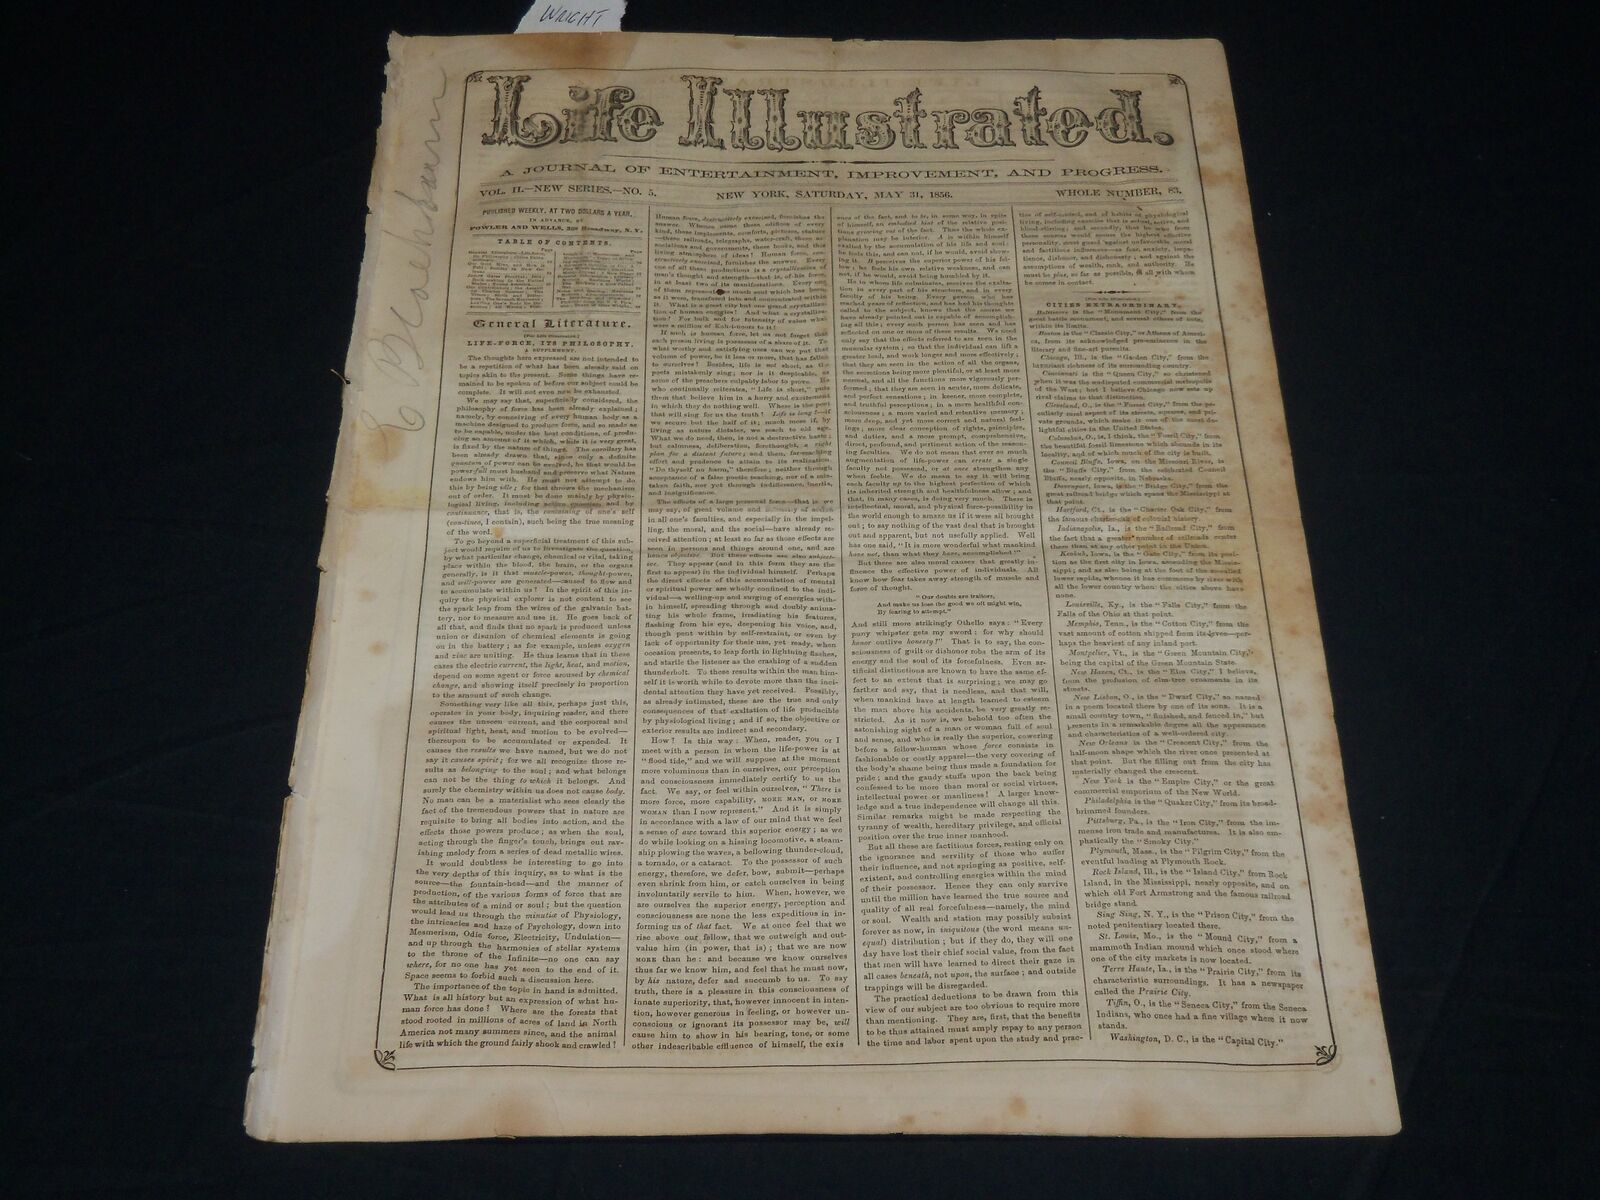 1856 MAY 31 LIFE ILLUSTRATED NEWSPAPER - SILAS WRIGHT DEATH - NP 4855